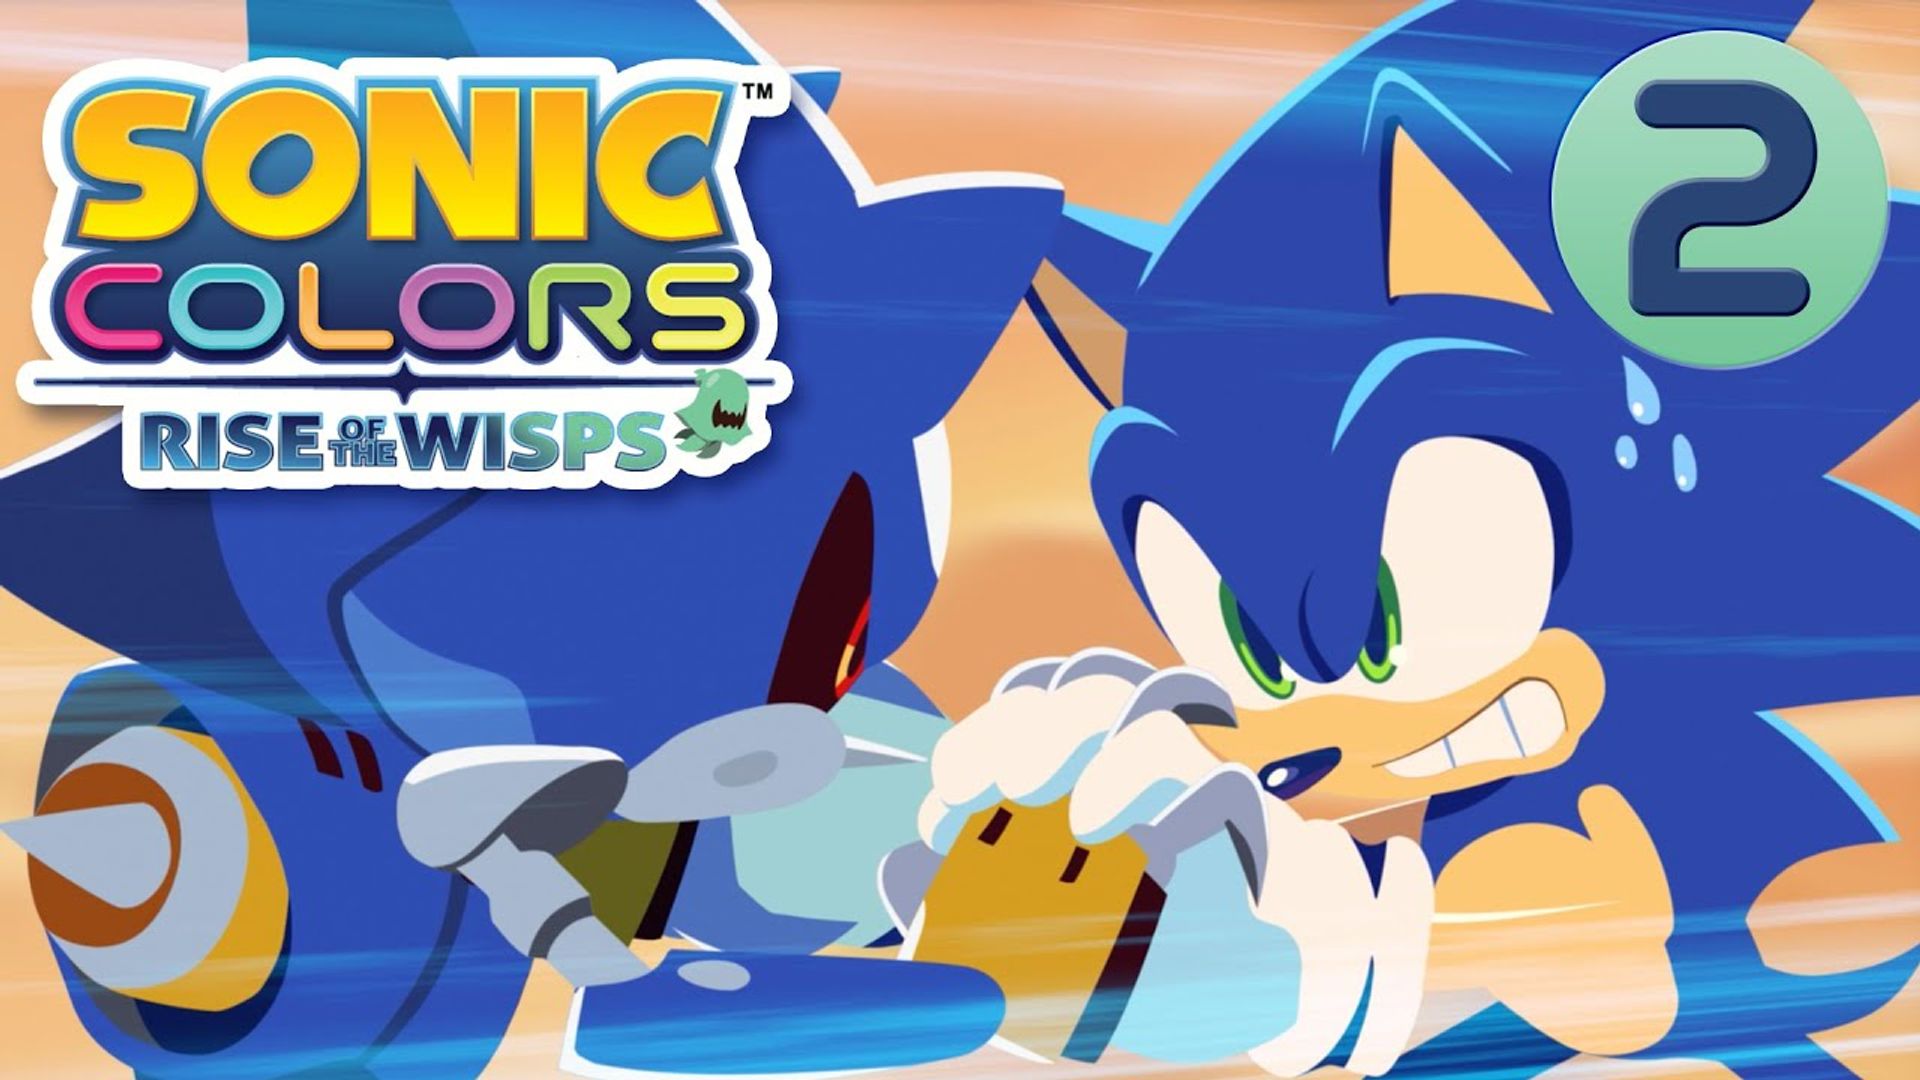 Sonic Colors: Rise of the Wisps background